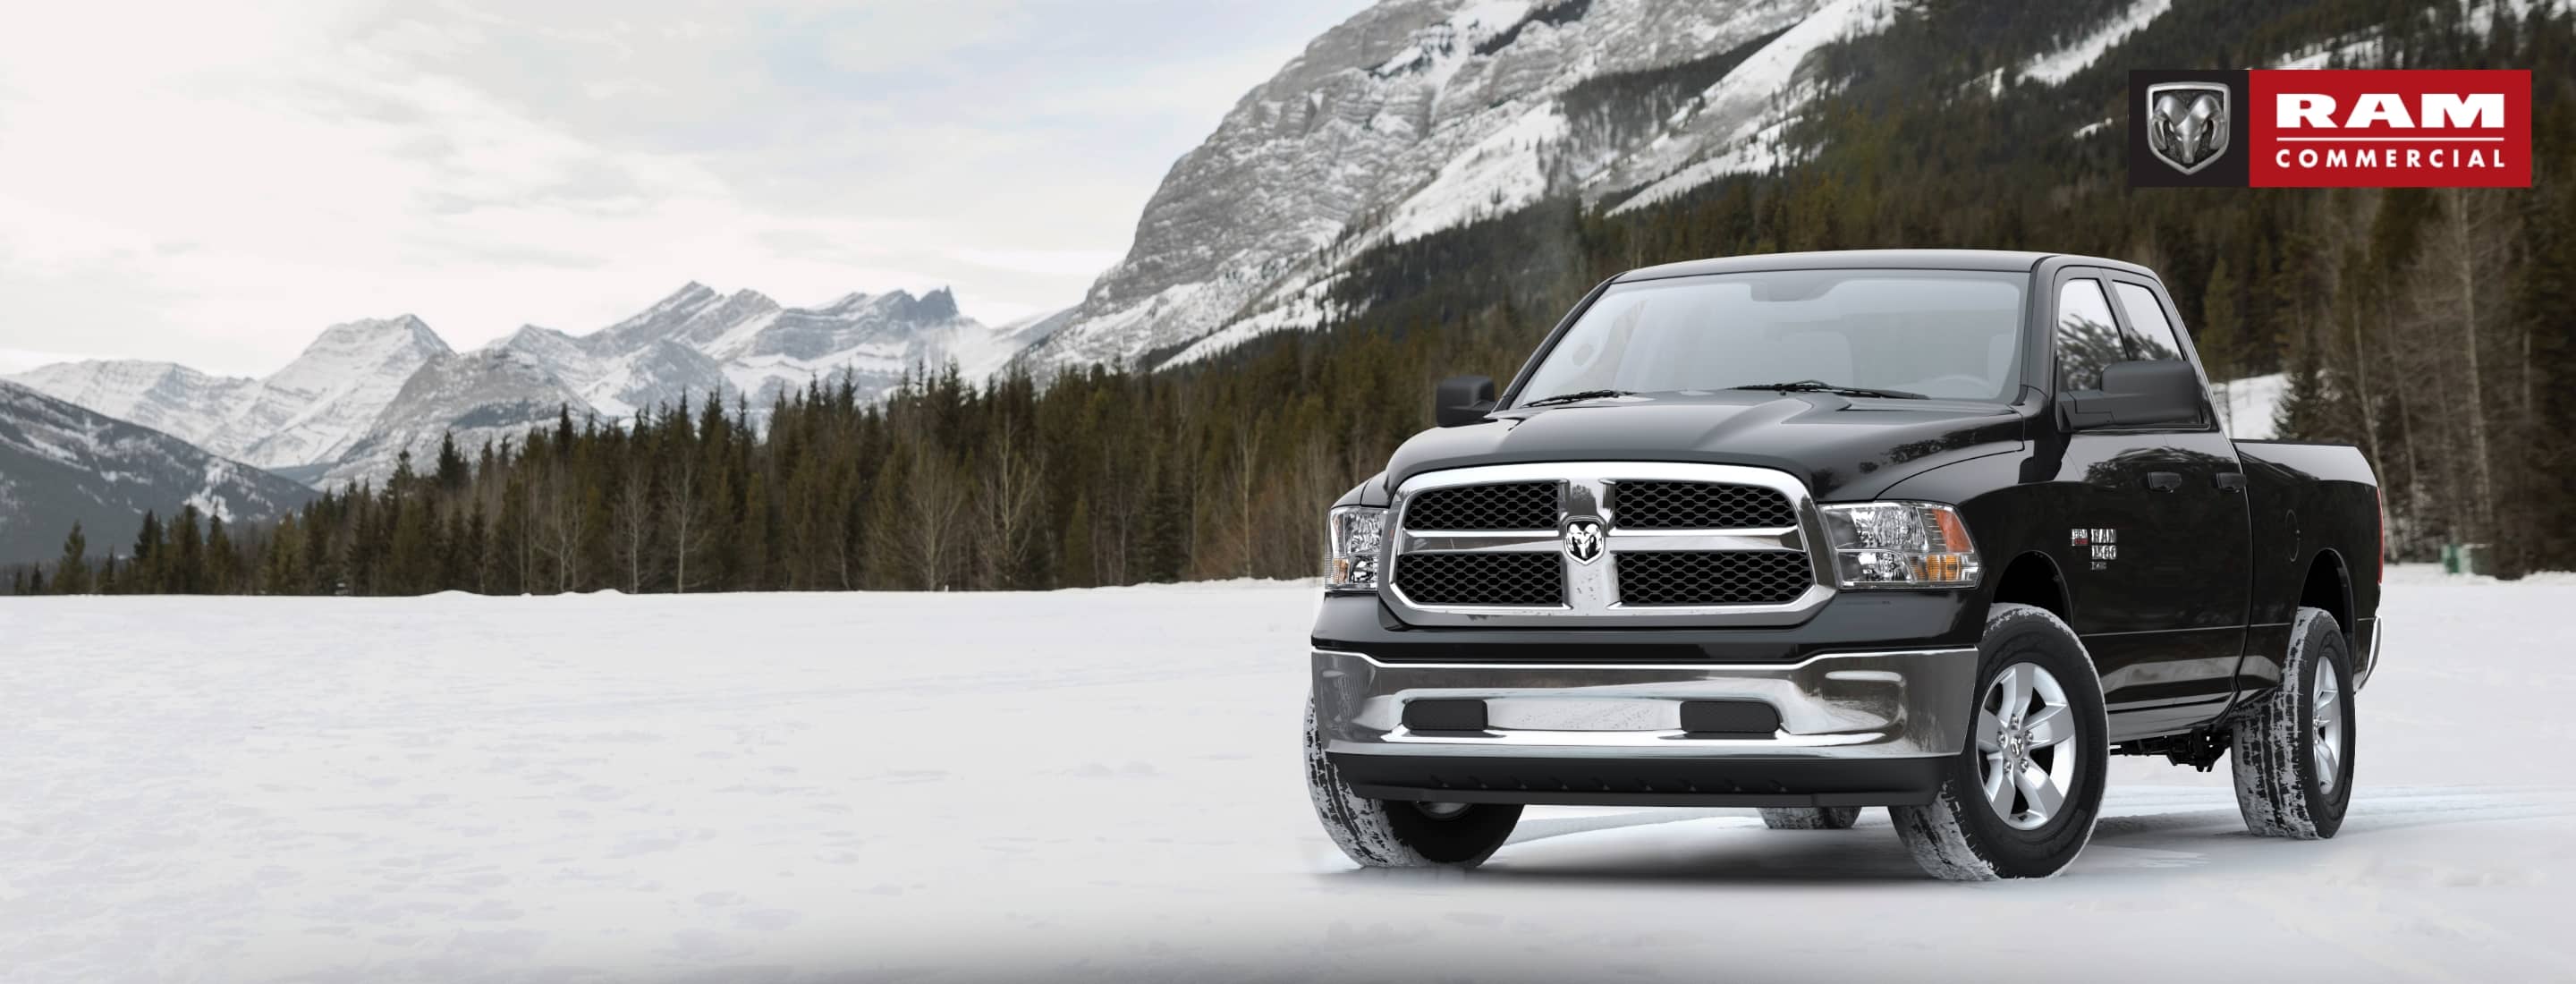 A 2021 Ram 1500 Classic Tradesman Crew Cab 4x4, parked on a snow-covered clearing in the mountains with evergreens in the background. The Ram Commercial logo.